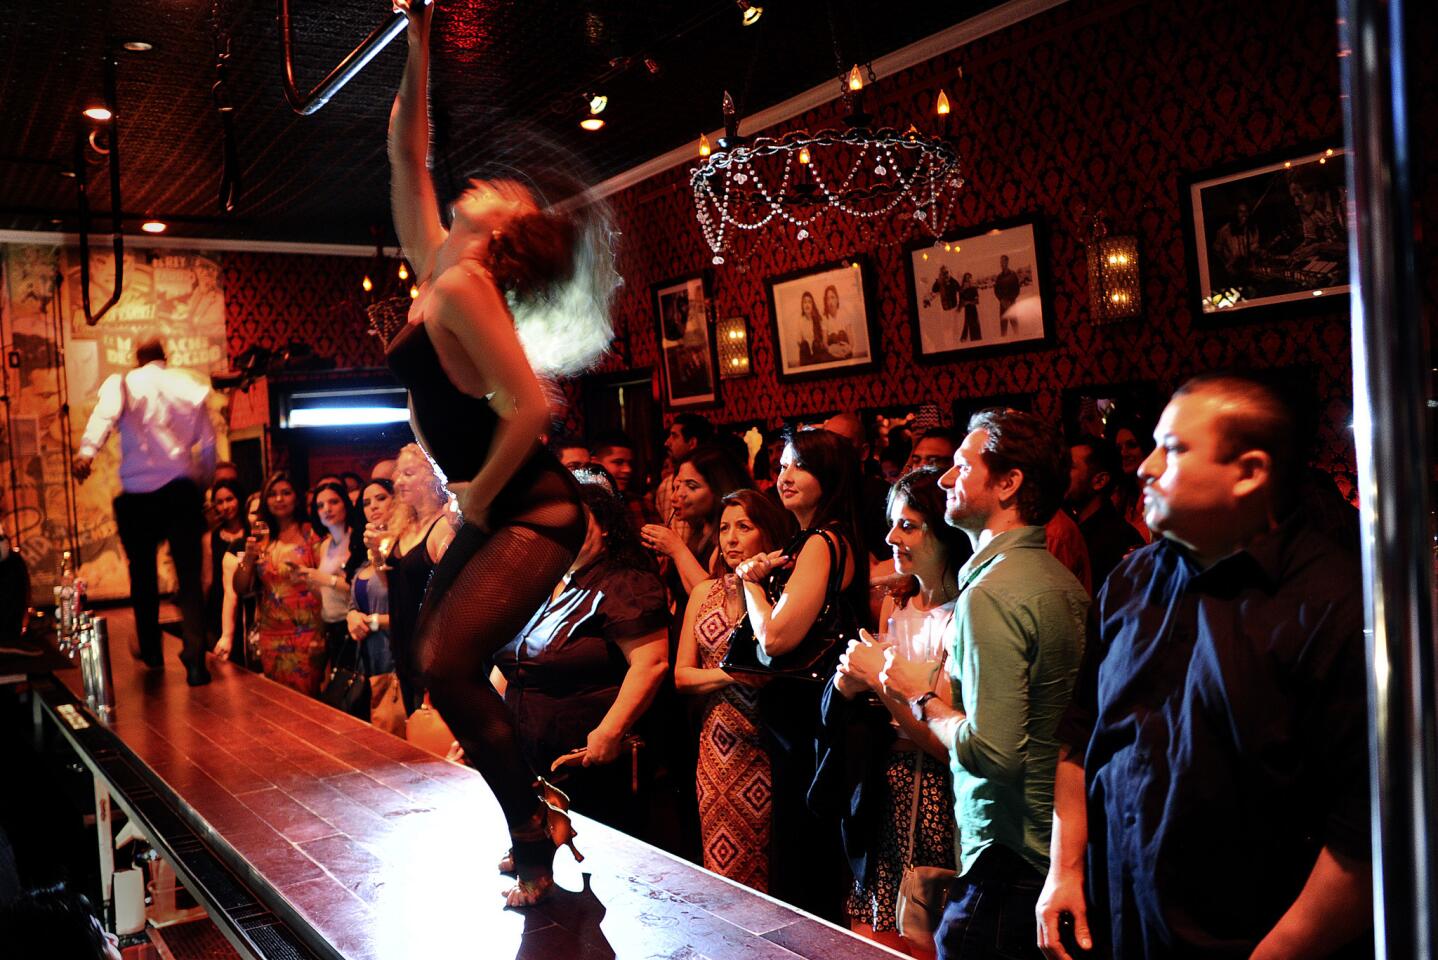 Customers enjoy a burlesque show on a Saturday night at the Eastside Luv wine bar in Boyle Heights. When it opened next door to Las Palomas in 2006, the neighborhood was hearing increasing chatter about imminent gentrification.